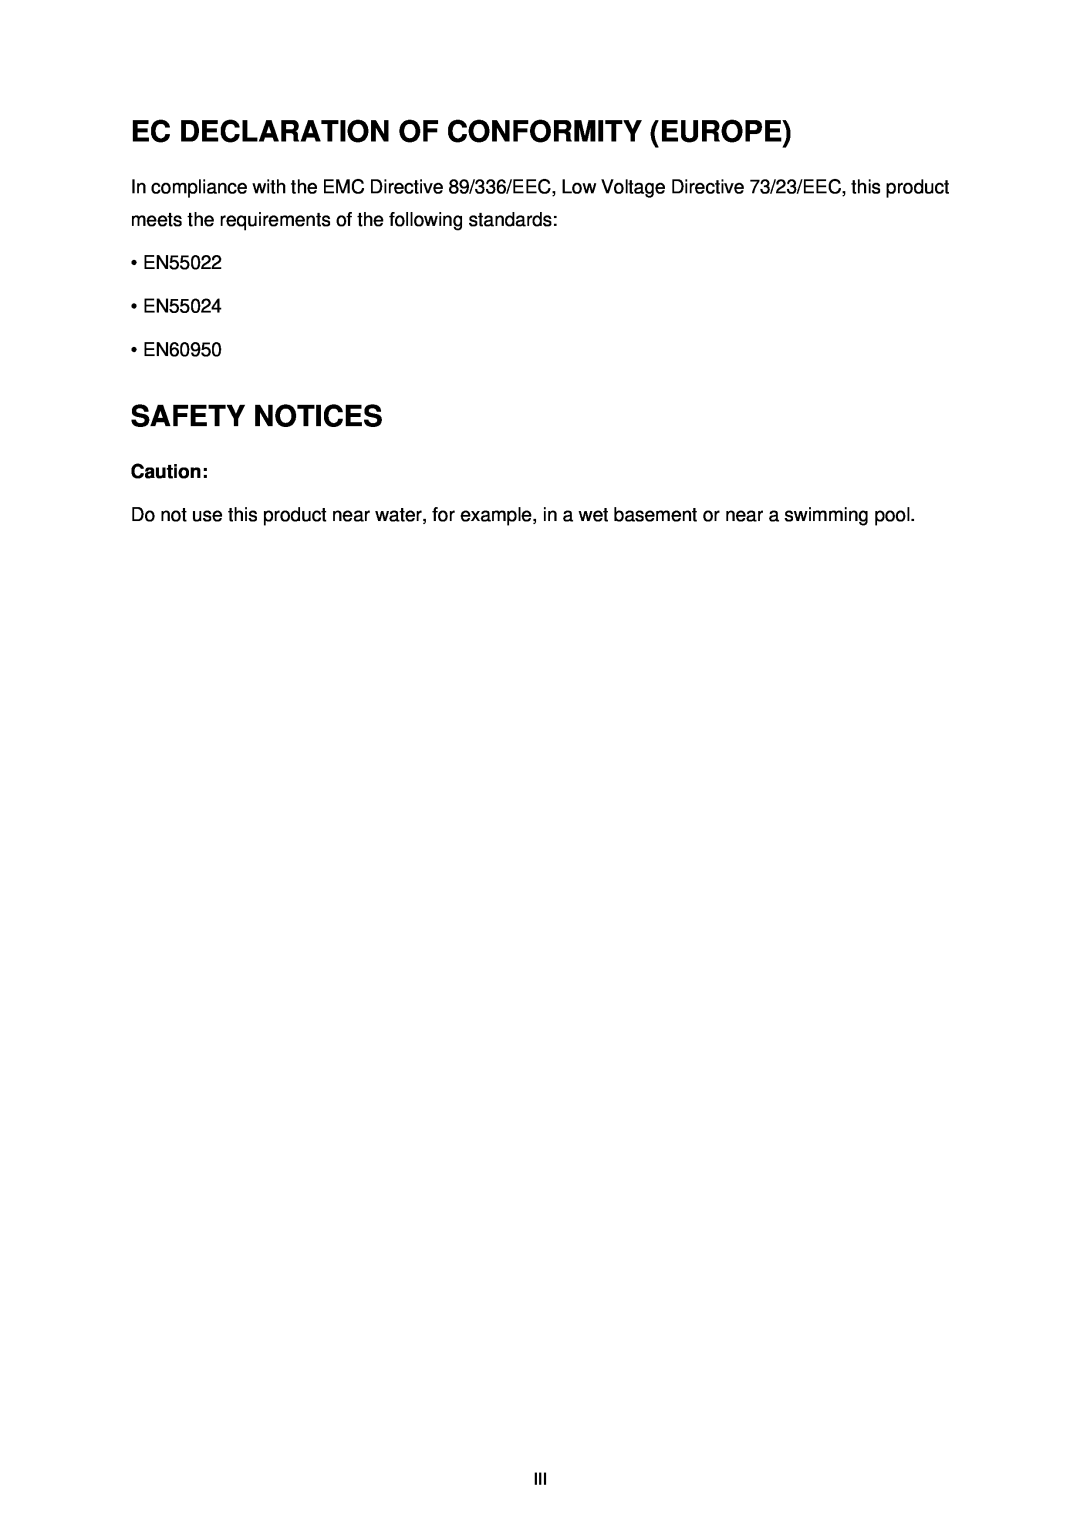 TP-Link TD-8840 manual Ec Declaration Of Conformity Europe, Safety Notices 